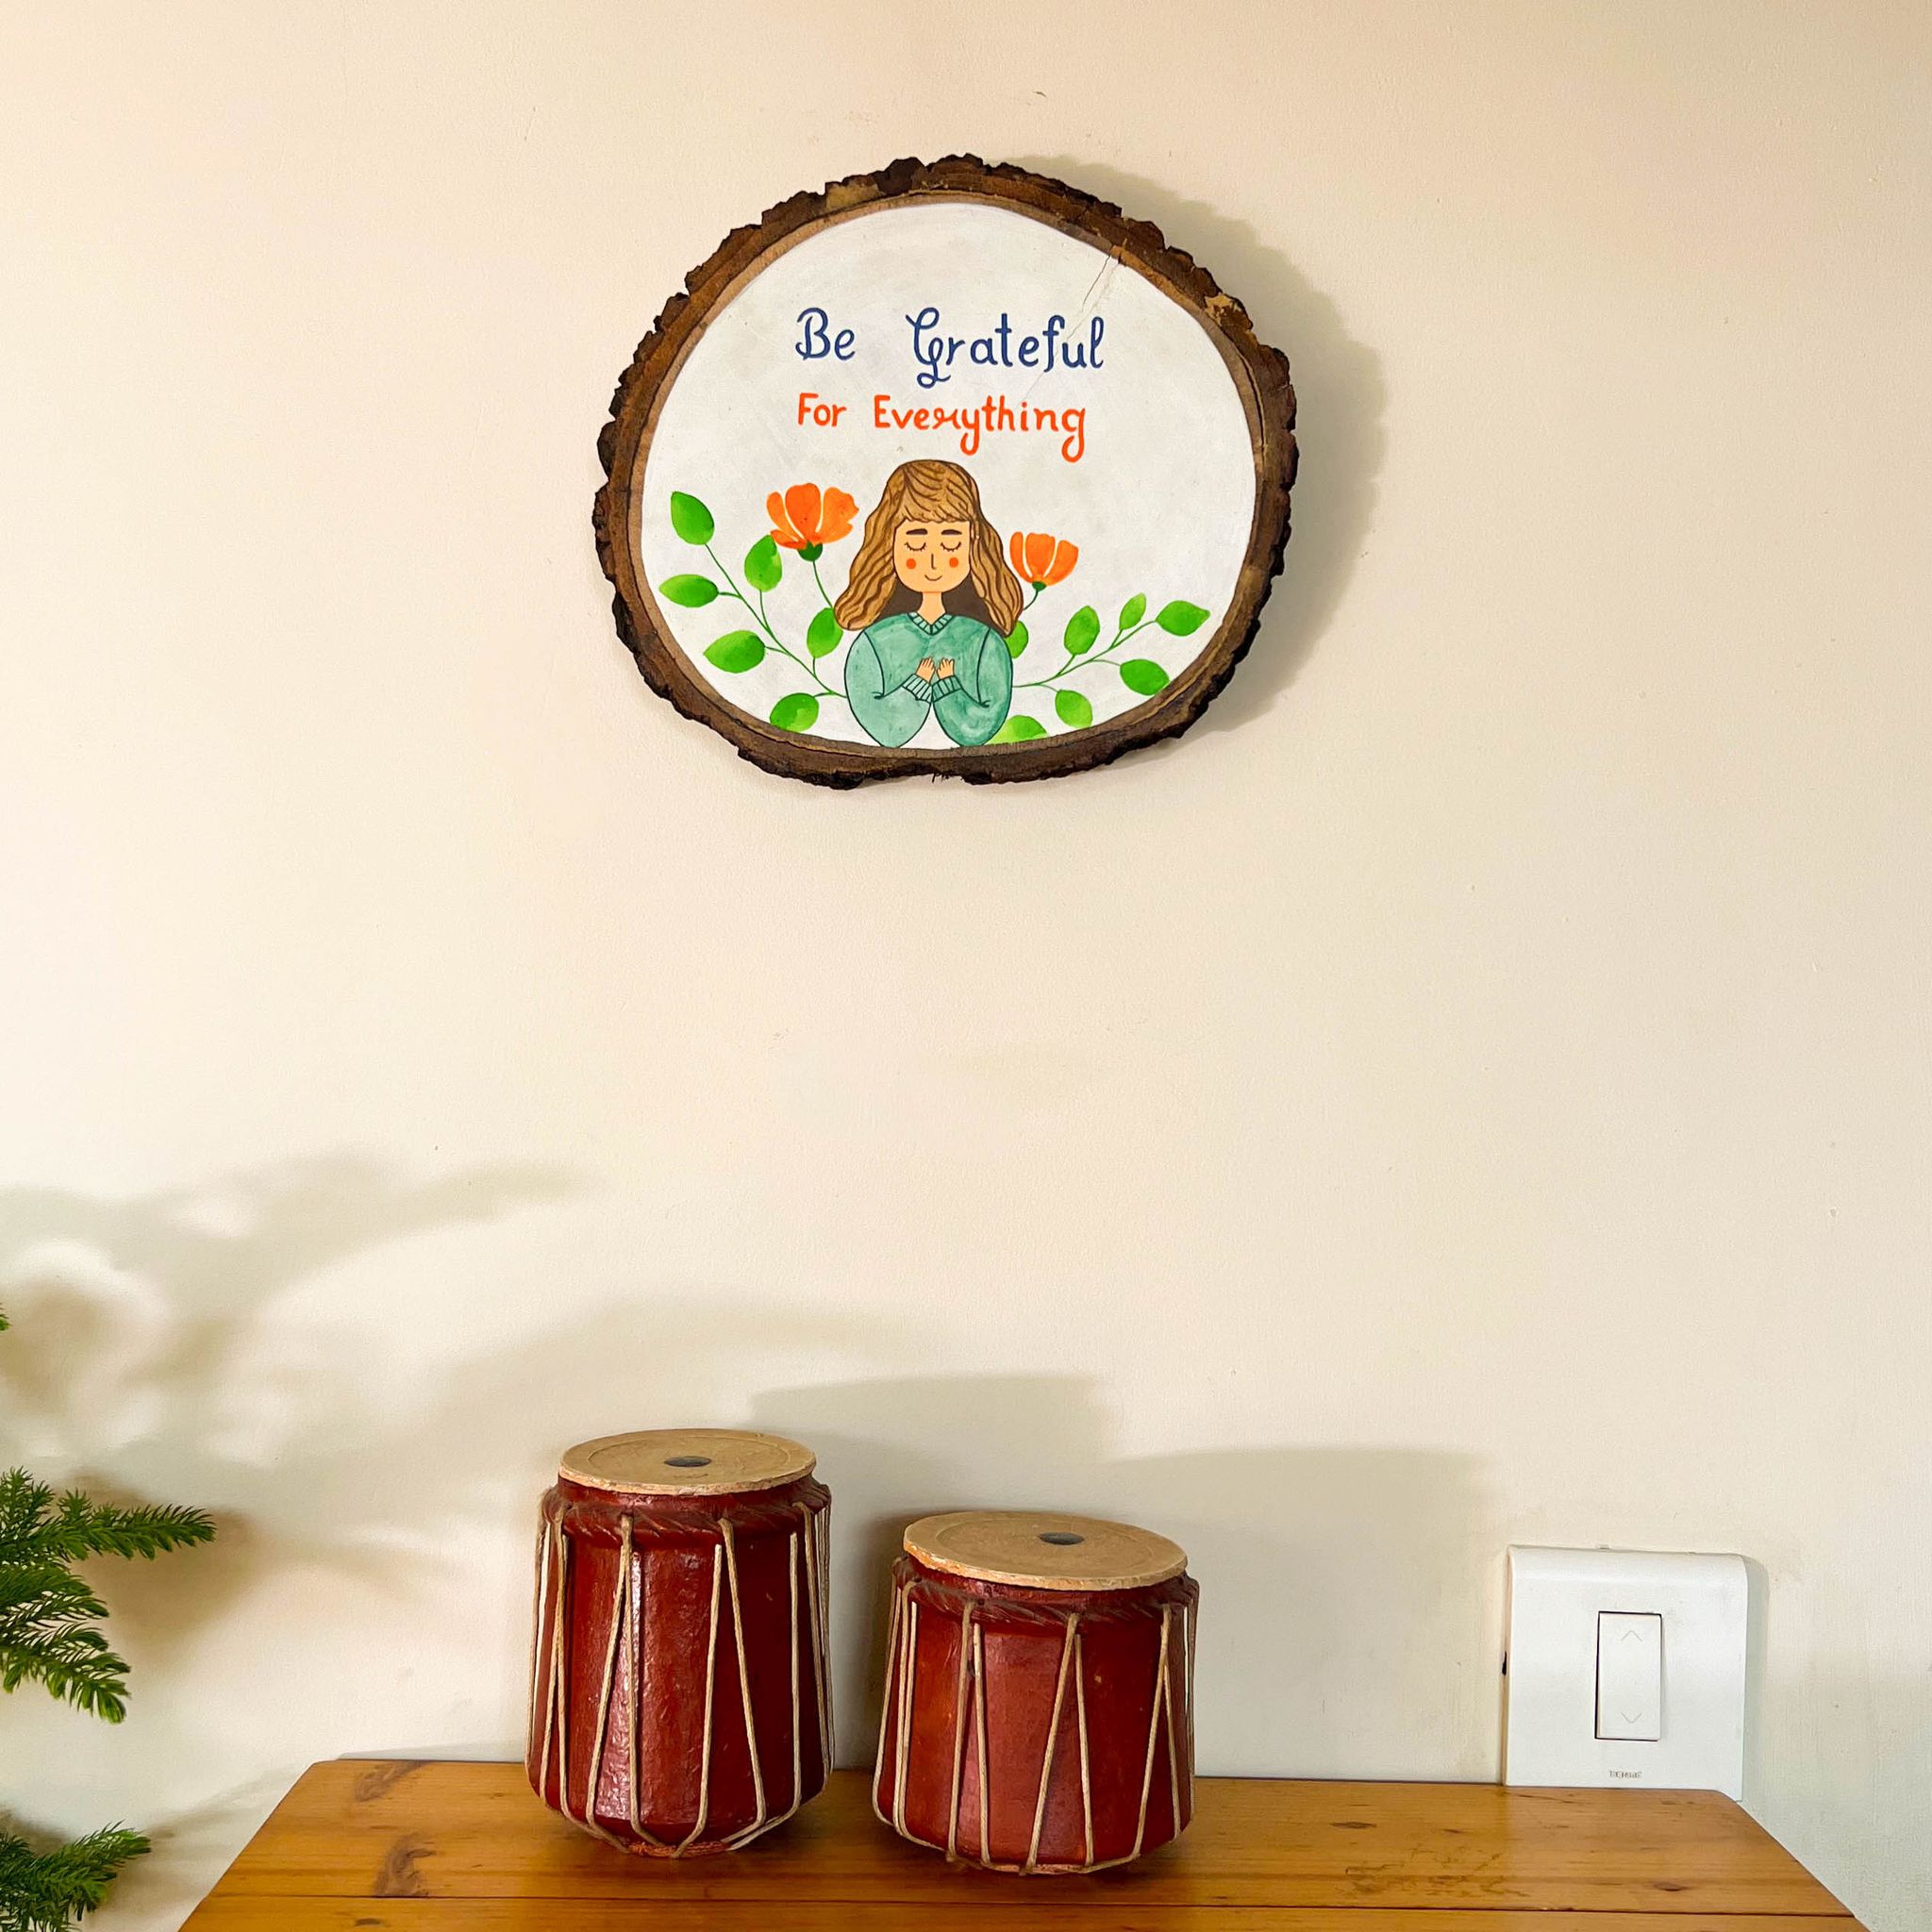 Scrapshala | Grateful Wooden Log Plate | Live Edge Wood | Hand-painted | Stain-proof | Upcycled